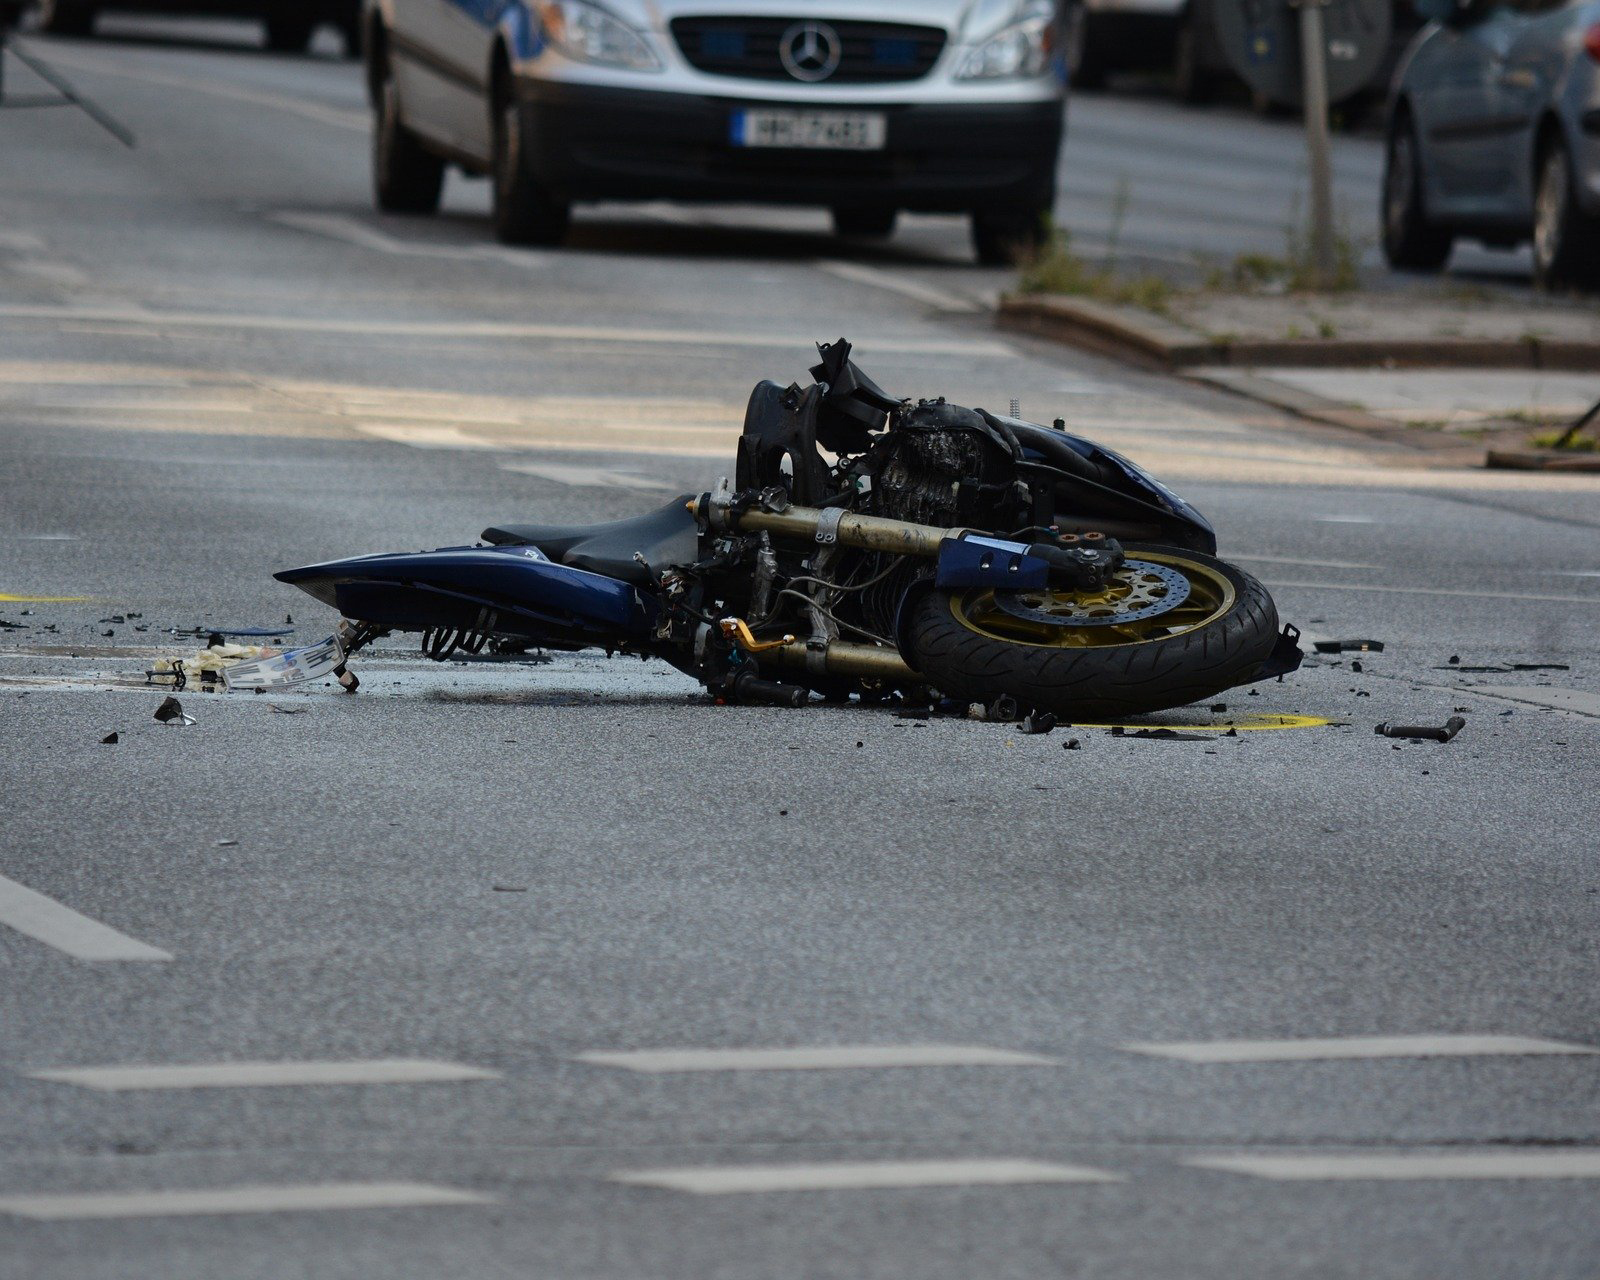 Crashed motocycle laying on the ground in the middle of the road - Spitzer Legal Motorcycle Accident Practice Area